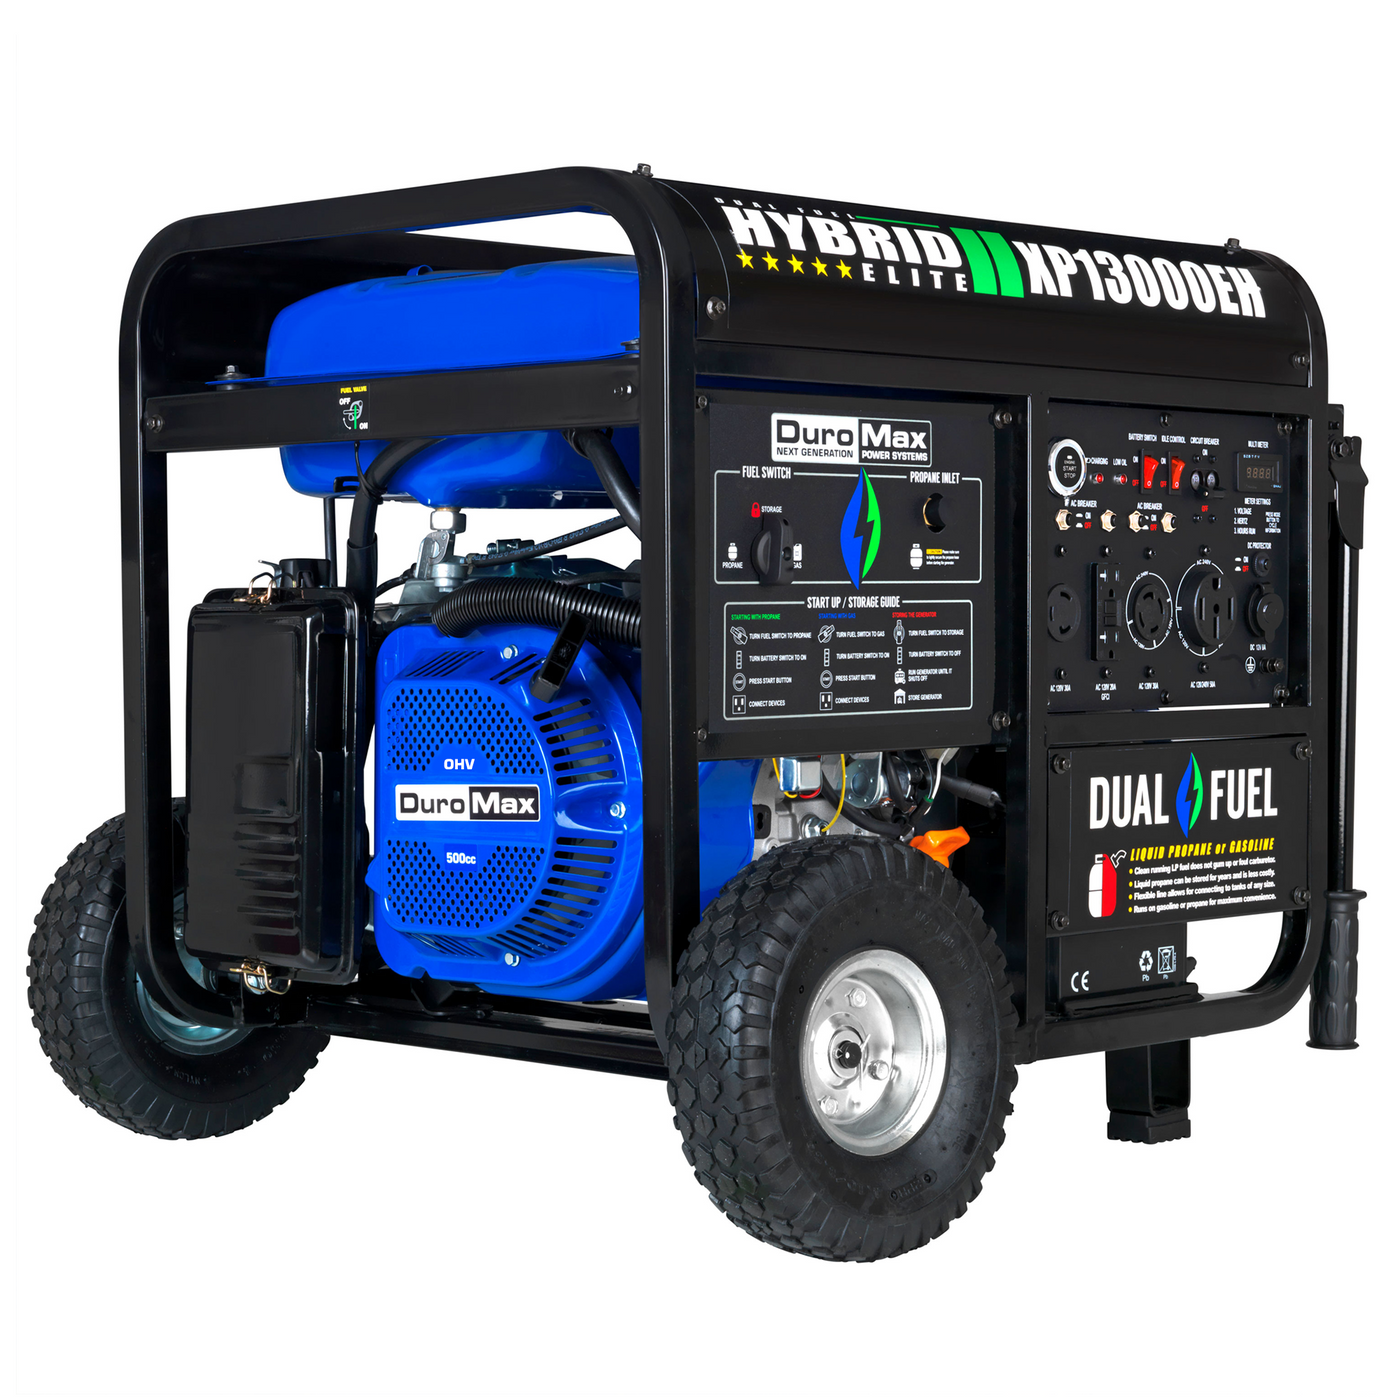 Westinghouse 12,500-Watt Dual Fuel Gas and Propane Powered Portable  Generator with Remote Start, Transfer Switch Outlet and CO Sensor  WGen9500DFc - The Home Depot